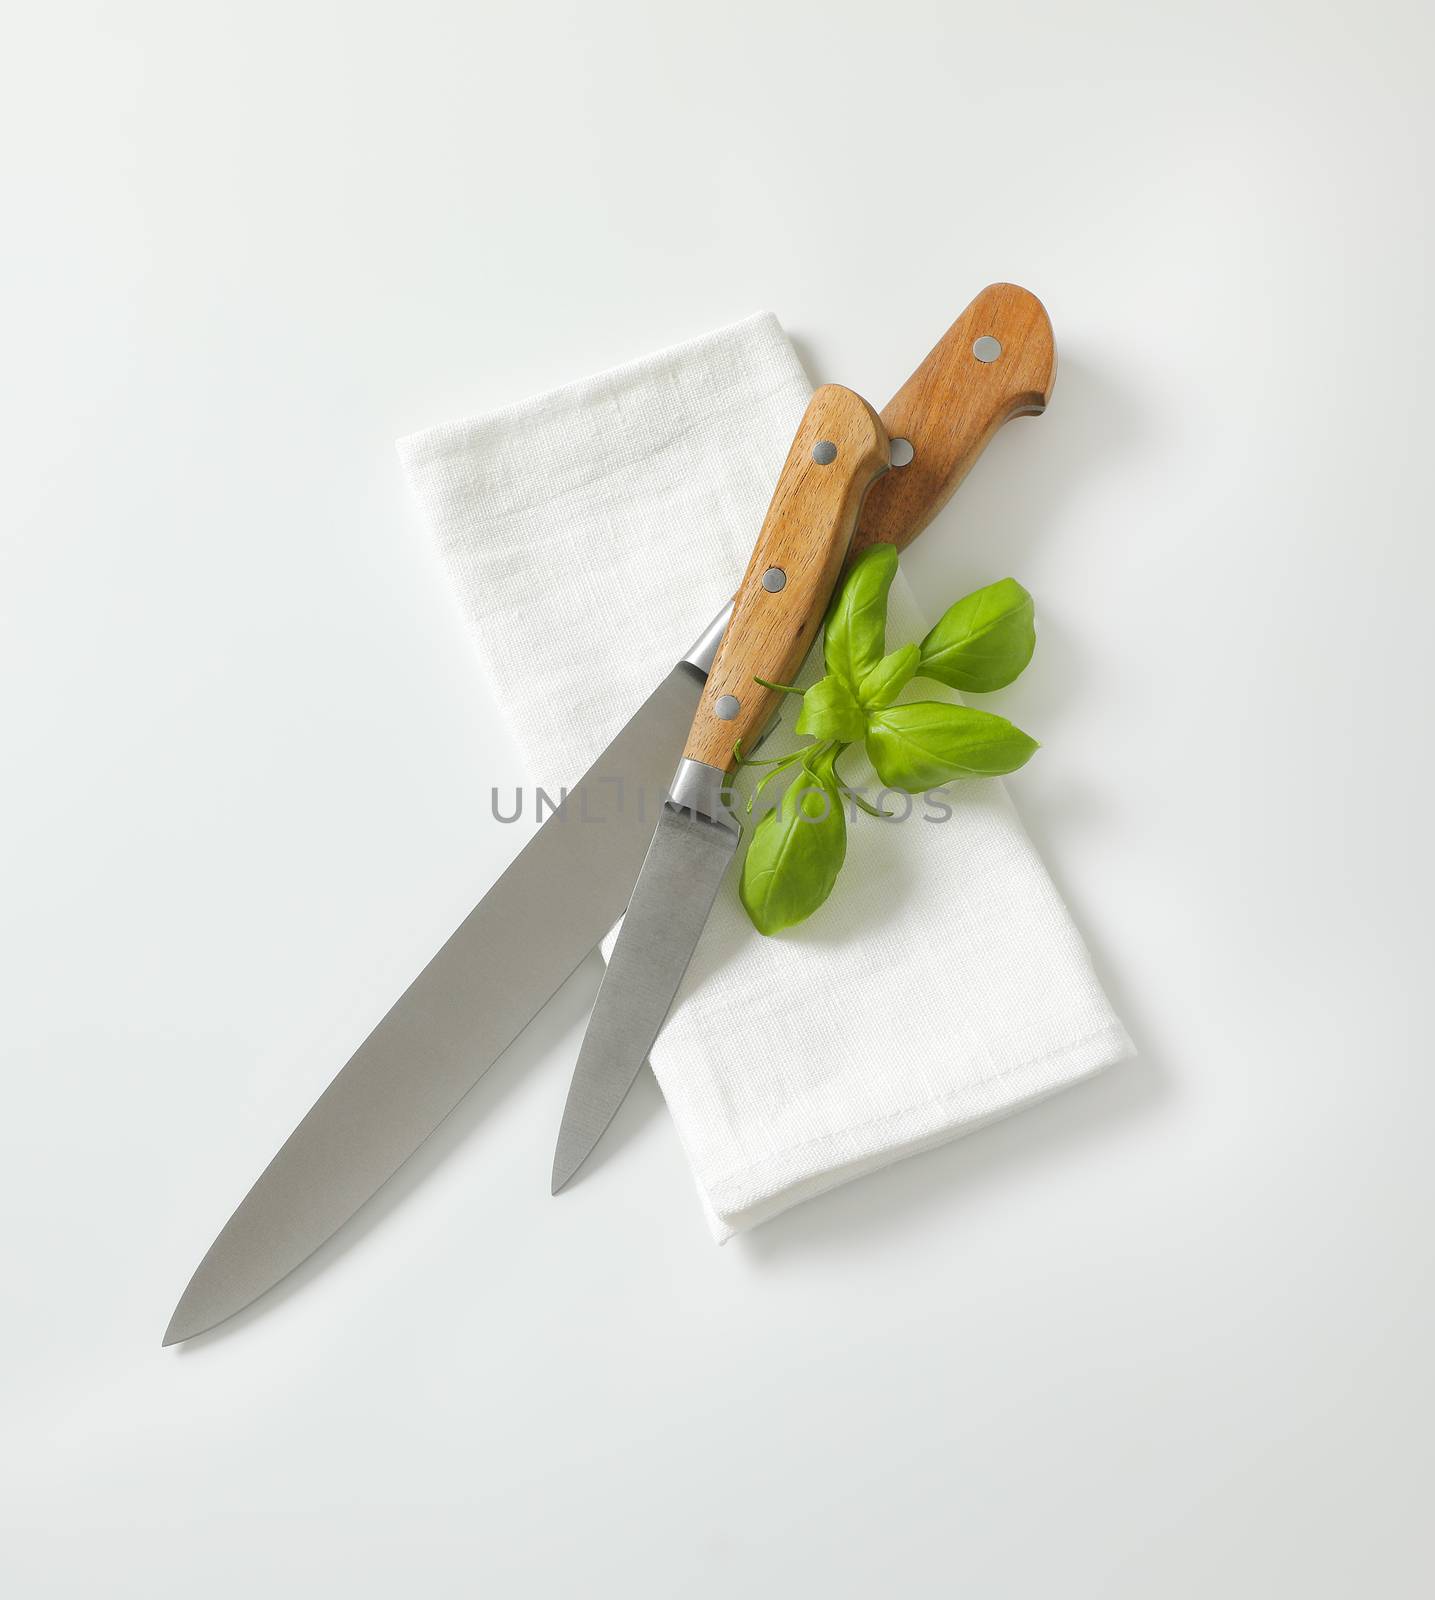 Set of two sharp pointed tip kitchen knives by Digifoodstock